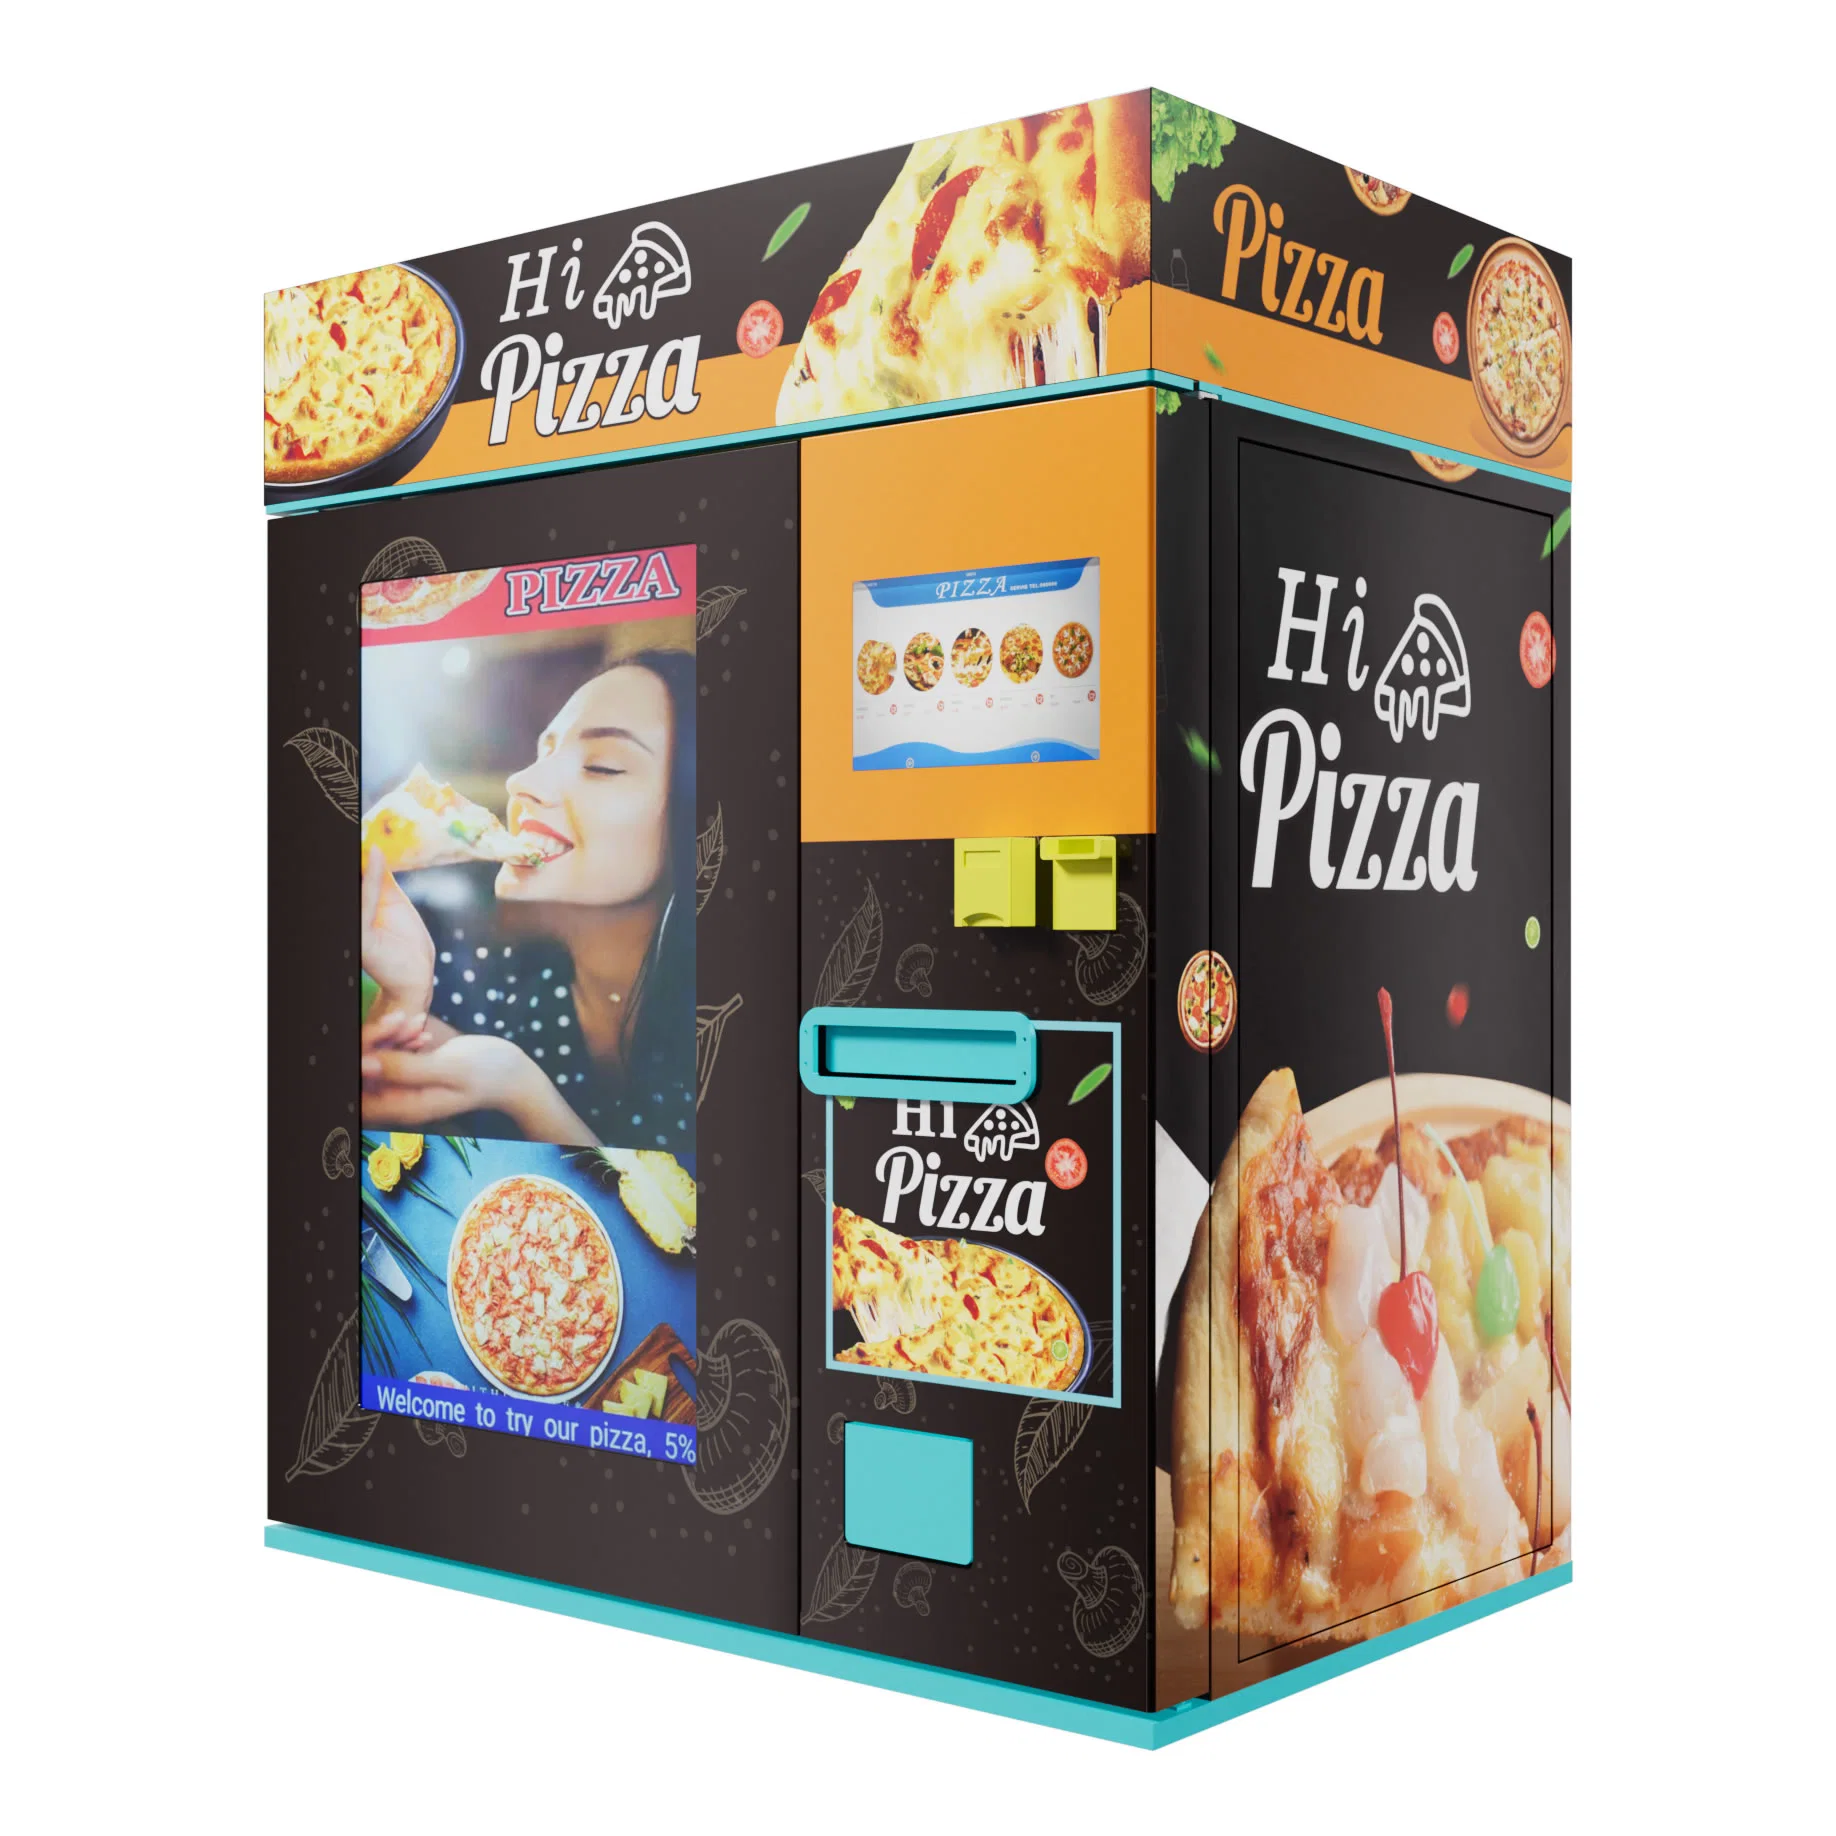 Outdoor Business Self-Service Fast Food Making Machine Fully Automatic Pizza Vending Machines for Sale